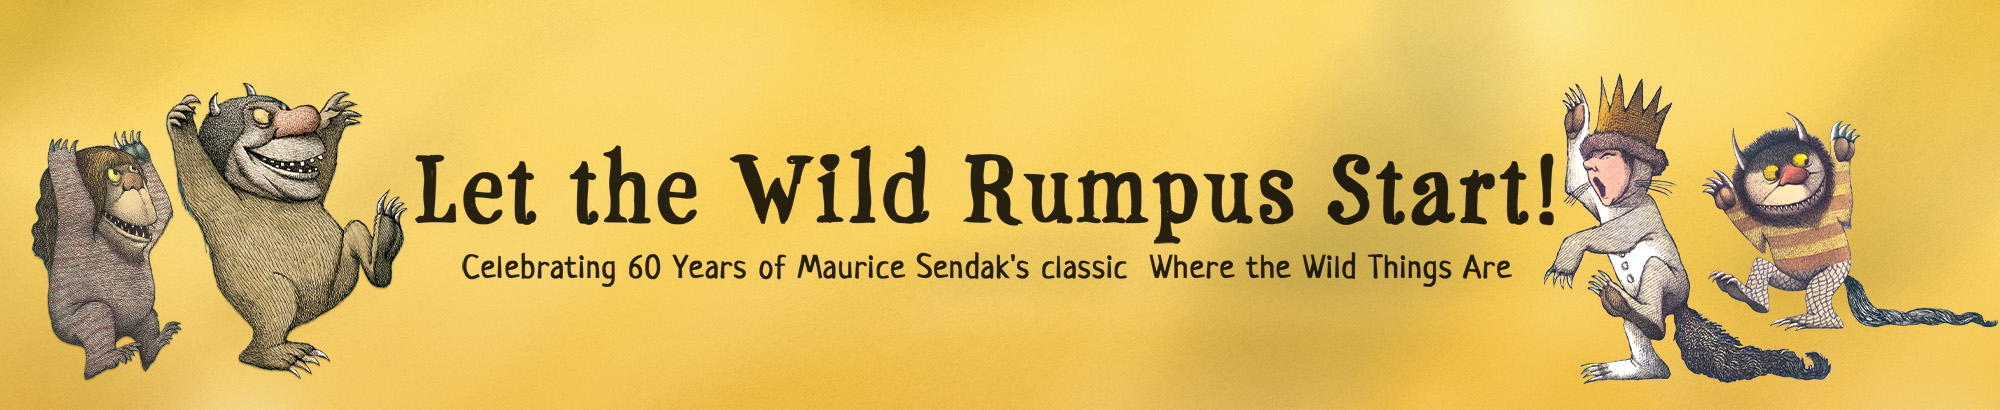 http://Let%20the%20Wild%20Rumpus%20Start!%20Celebrating%2060%20years%20of%20Maurice%20Sendak's%20classic%20Where%20the%20Wild%20Things%20Are